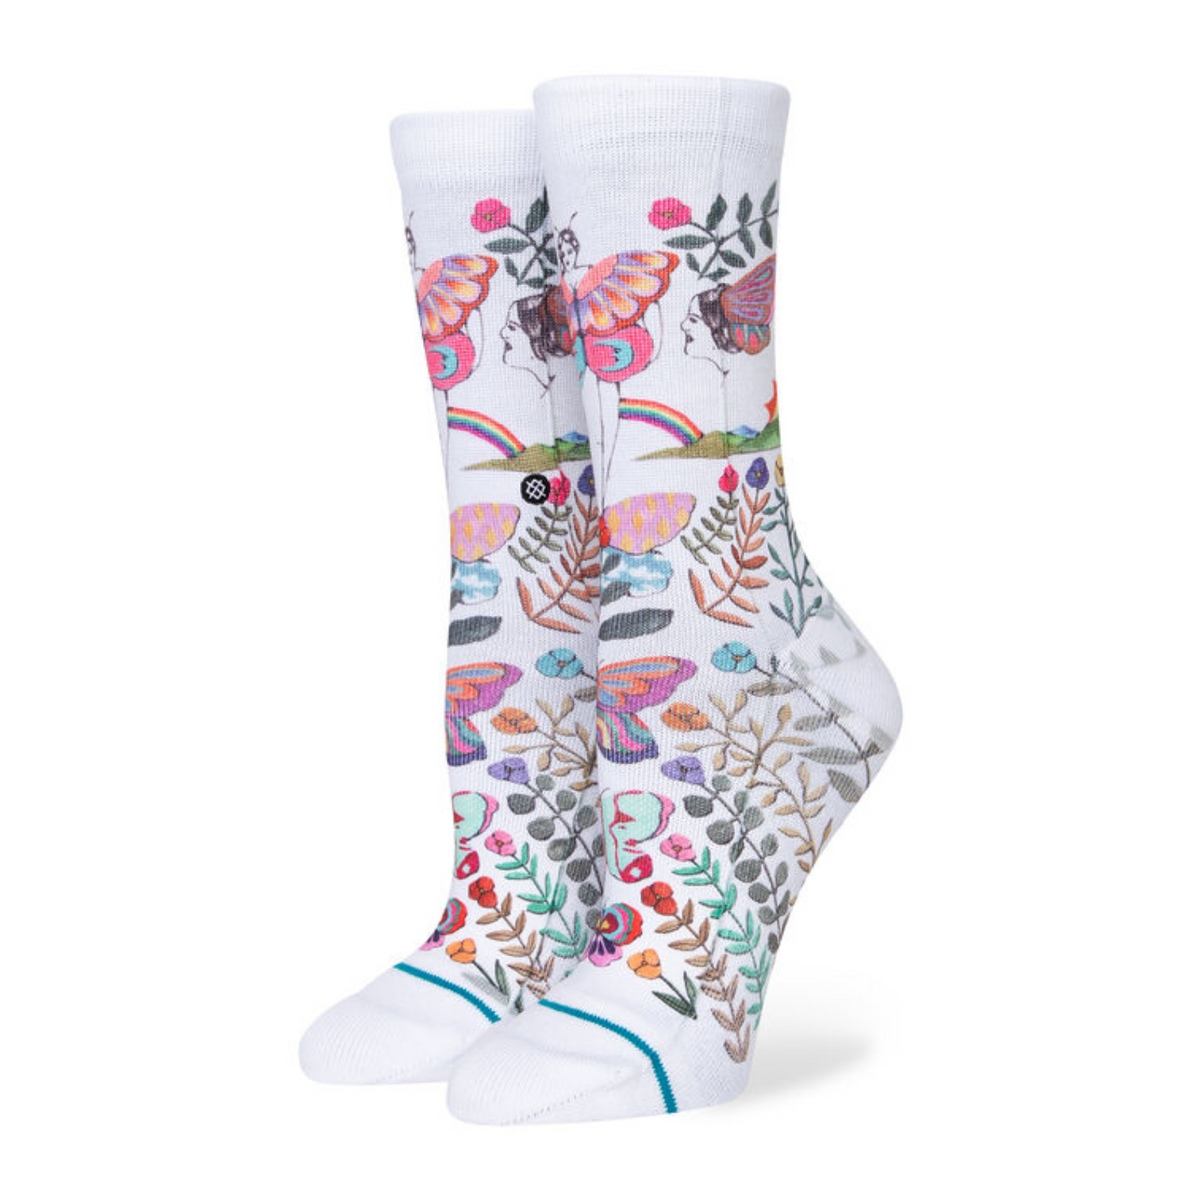 Stance Garden of Growth women&#39;s crew sock featuring white sock with drawings of butterflies, flowers, and rainbows on display feet